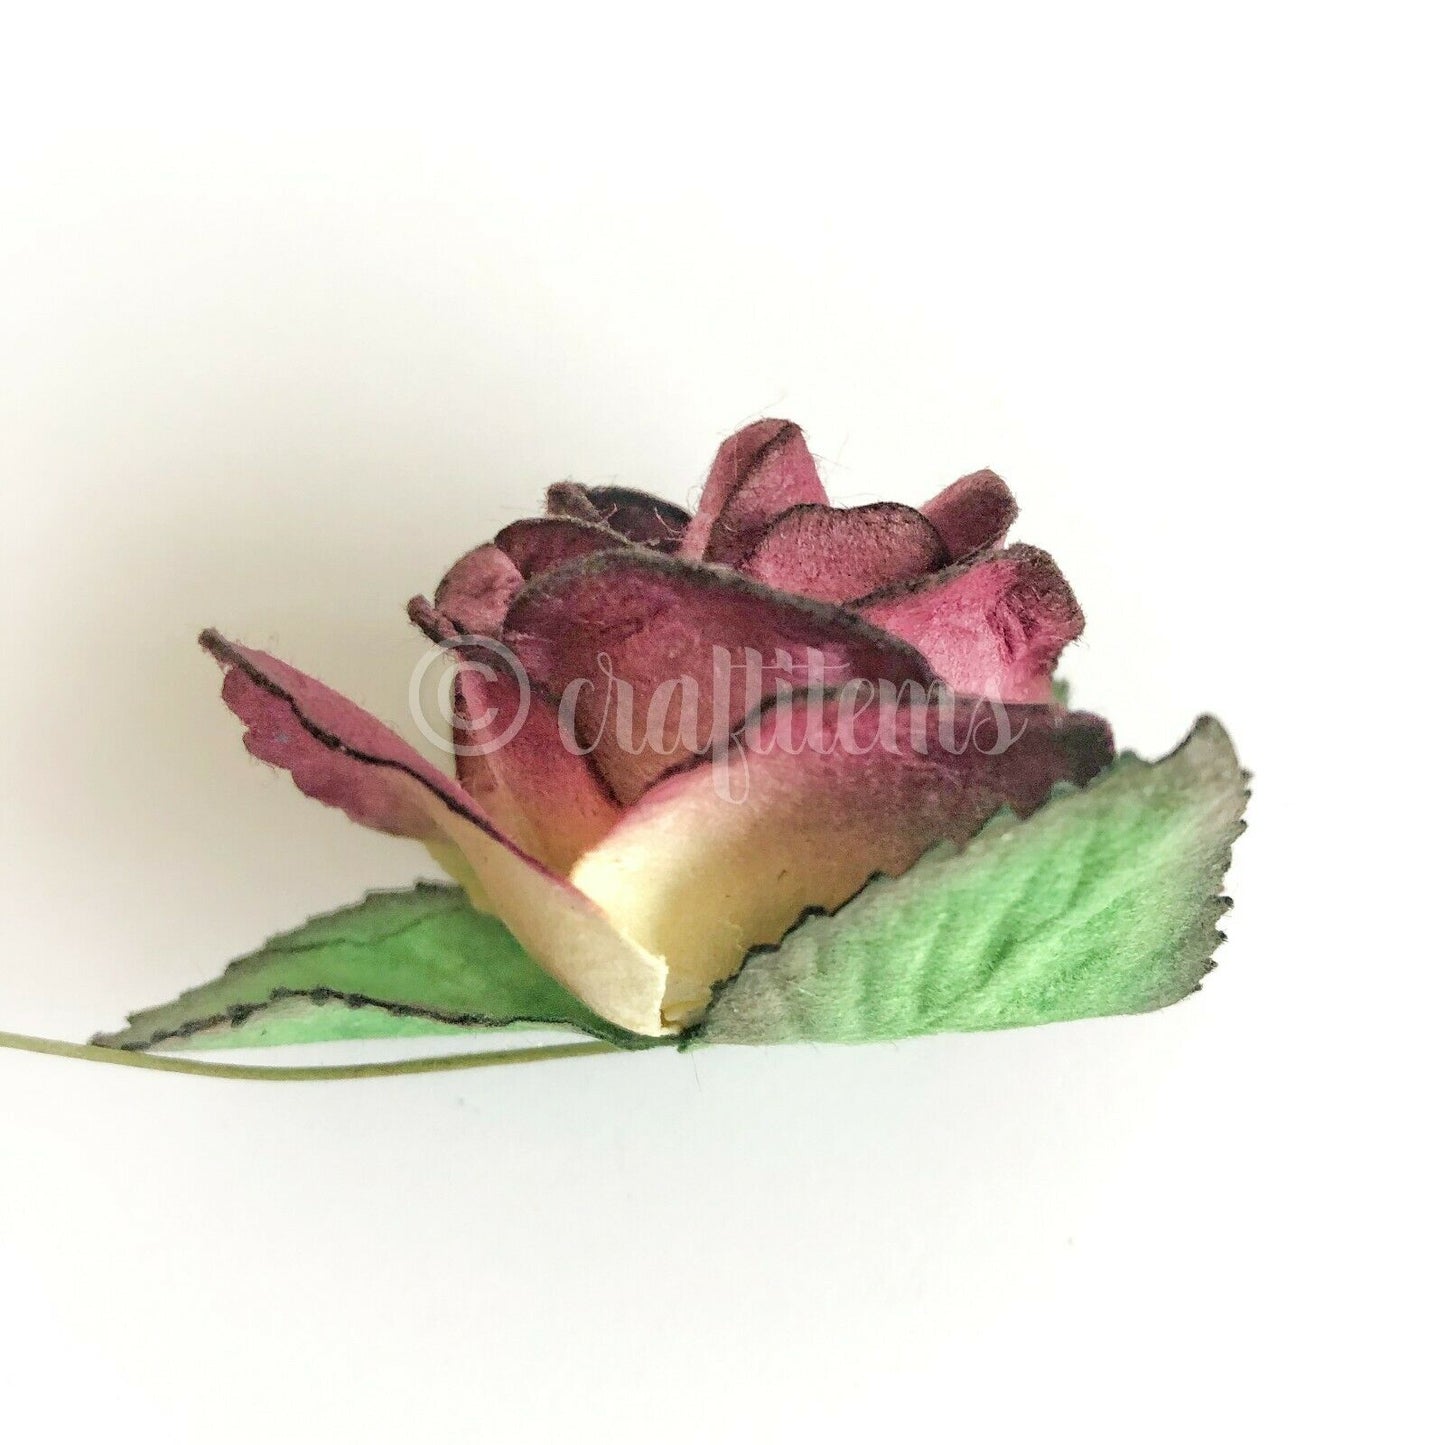 Small Mulberry Paper Rose Flowers For Card Making Craft With Wire Green Stem 5cm